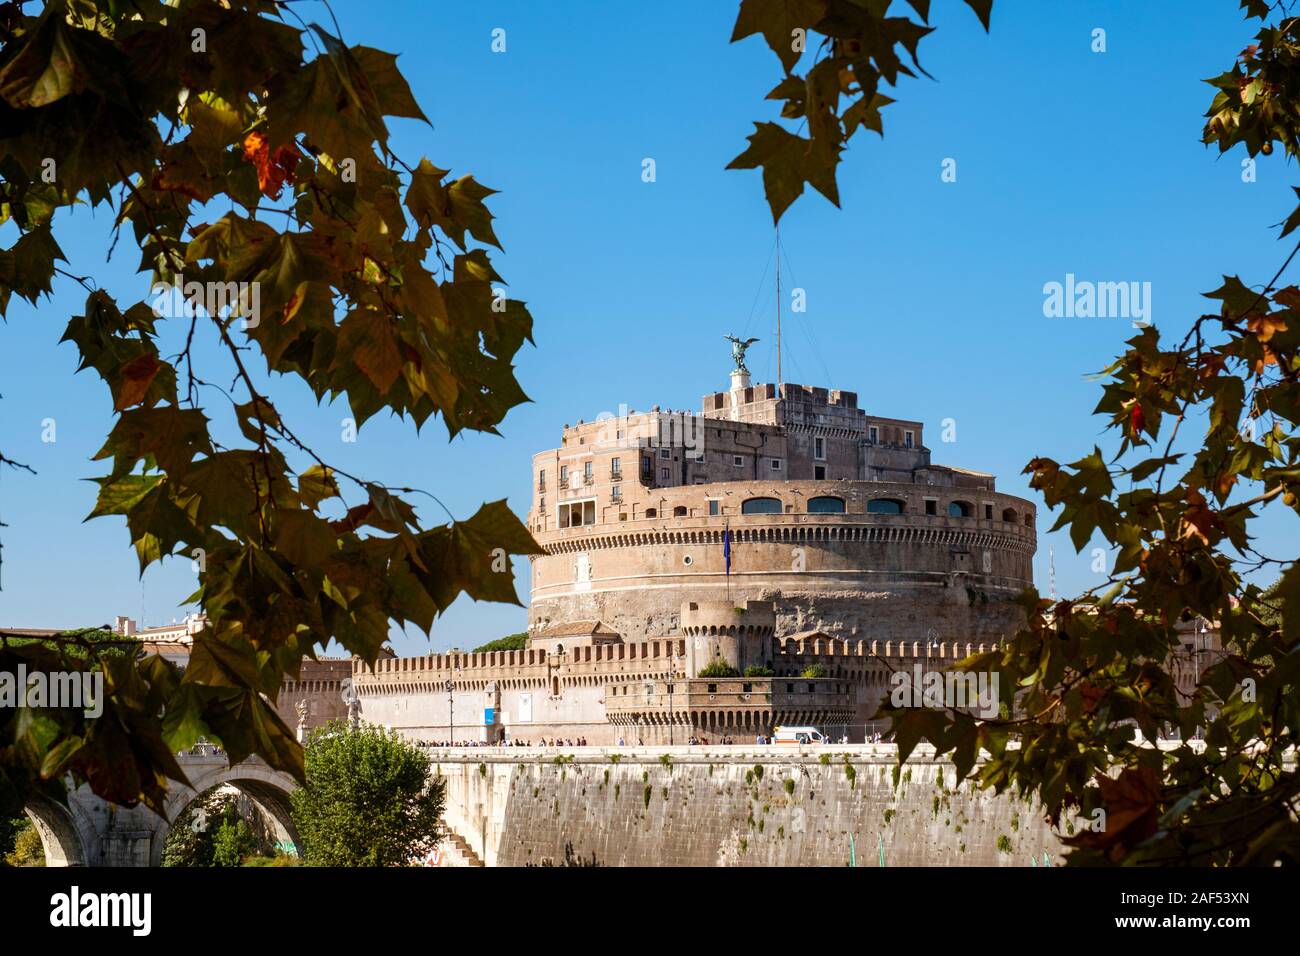 Ancient Rome buildings, Castel Sant'Angelo or Castle of the Holy Angel, Mausoleum of Hadrian, Rome, Italy Stock Photo